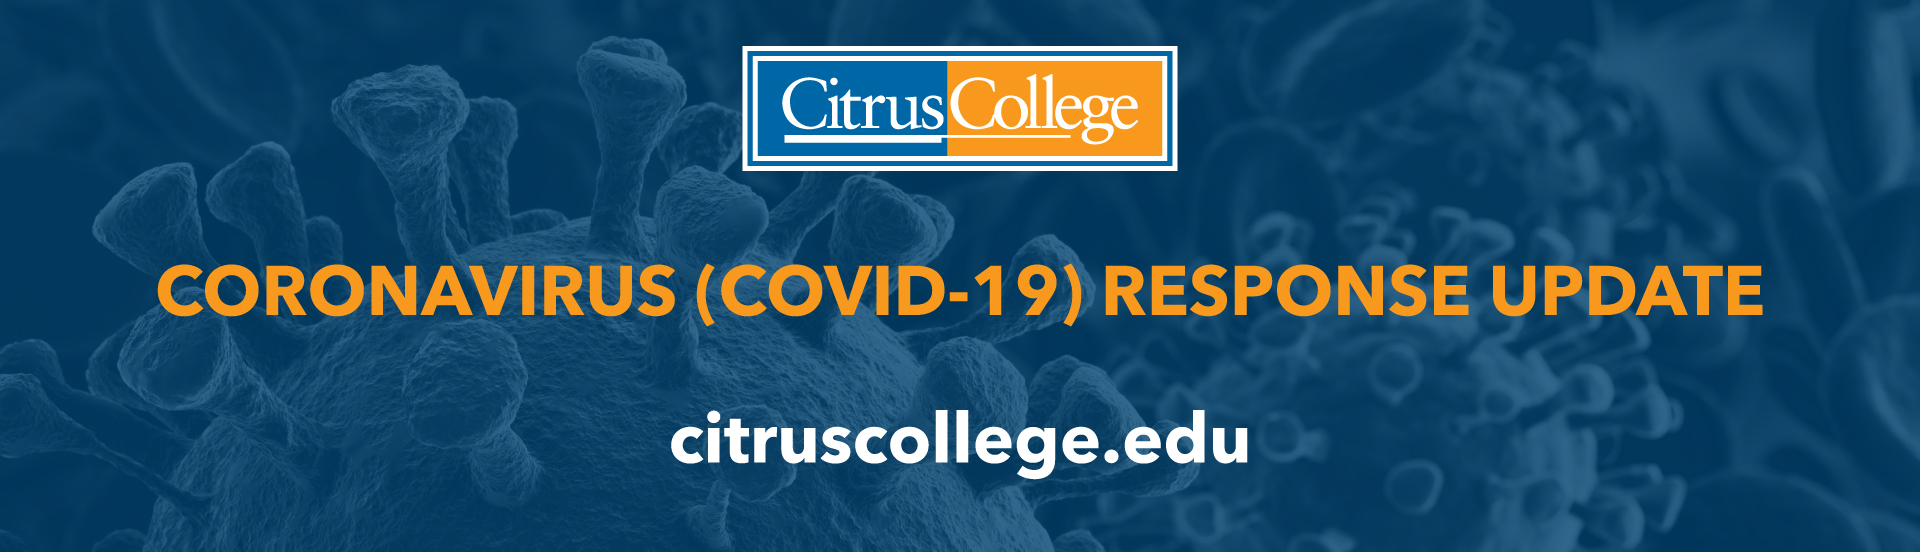 COVID 19 banner with Citrus College logo